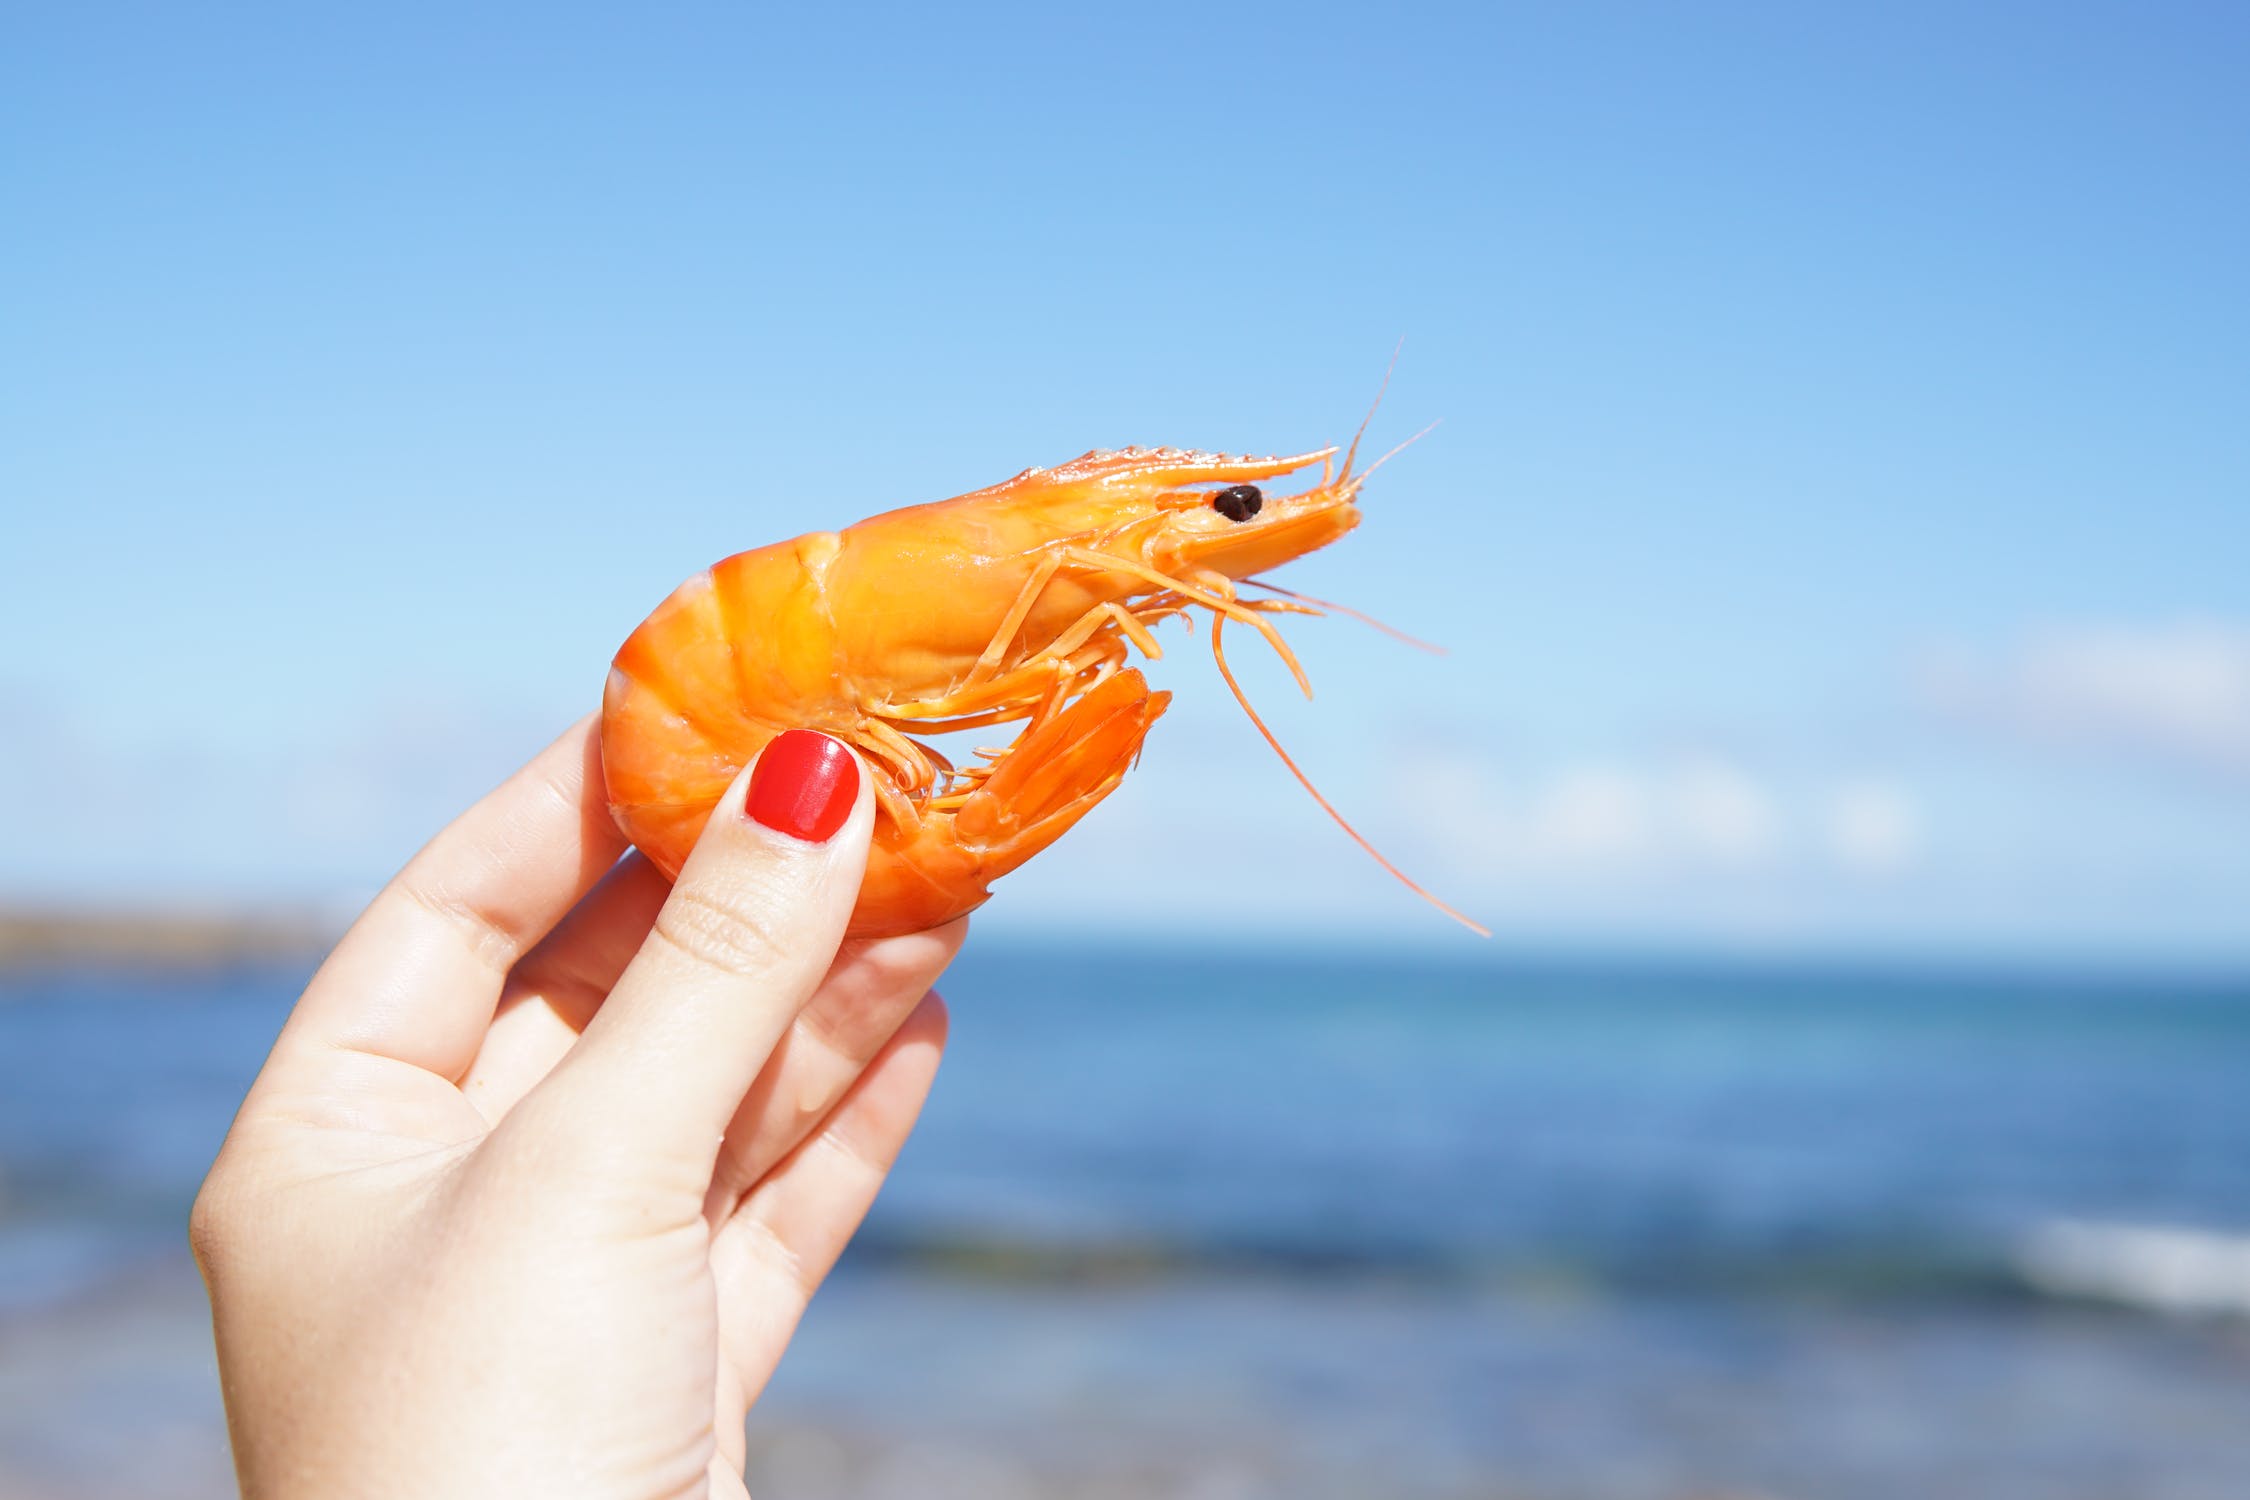 Food imports banned in China after Shrimp tested positive for corona virus – Latest update